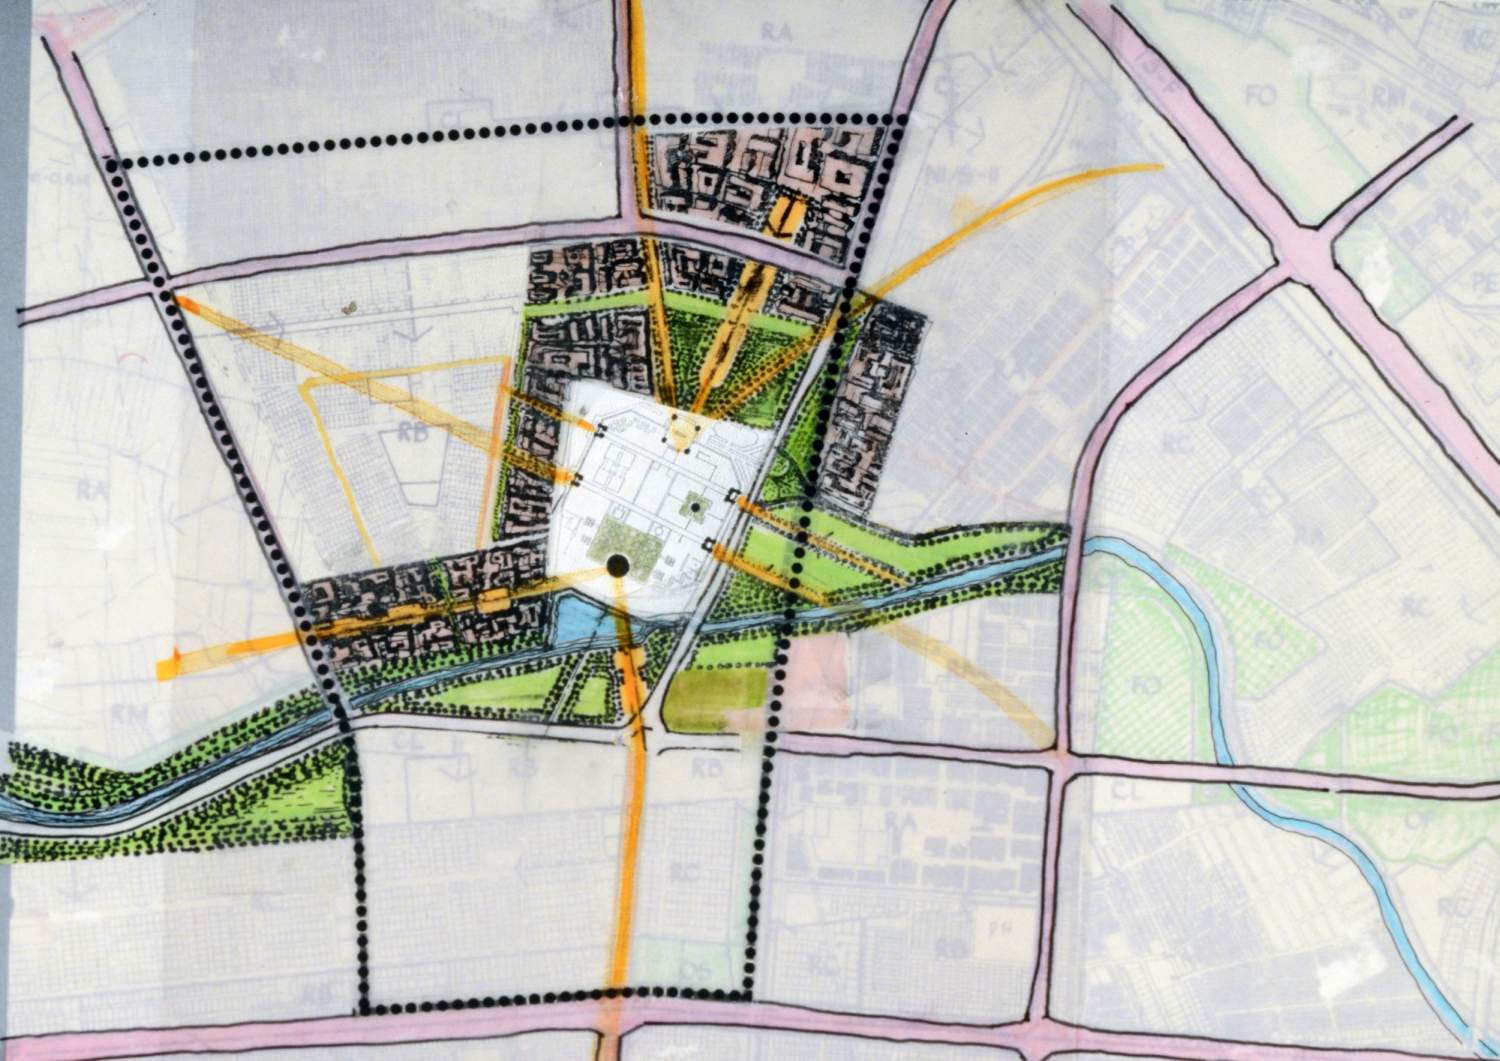 Site plan rendering of mosque and adjacent green areas, surrounding buildings and roads, on translucent ground, over intended location showing mosque on map of Baghdad neighborhoods.